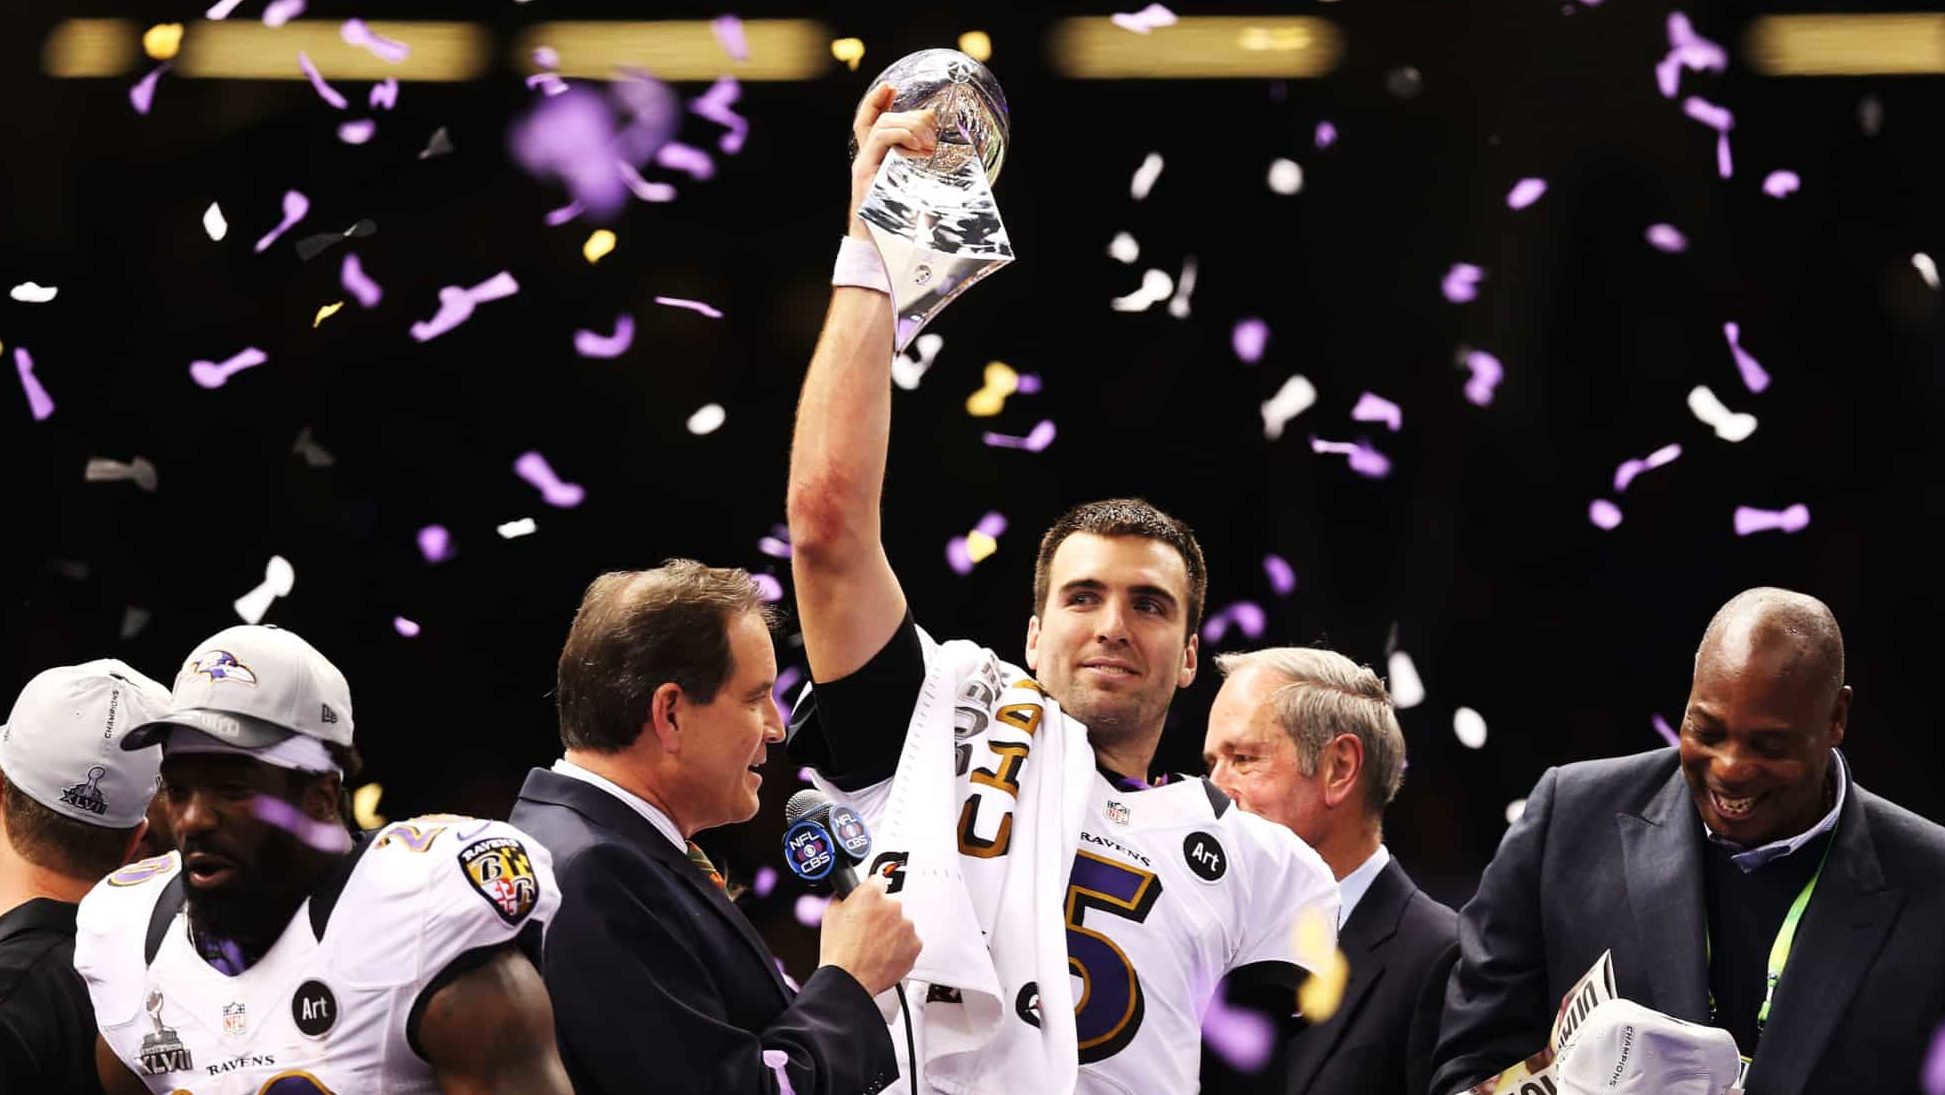 NEW ORLEANS, LA - FEBRUARY 03: Super Bowl MVP Joe Flacco #5 of the Baltimore Ravens celebrates with the Vince Lombardi trophy after the Ravens won 34-31 against the San Francisco 49ers during Super Bowl XLVII at the Mercedes-Benz Superdome on February 3, 2013 in New Orleans, Louisiana.